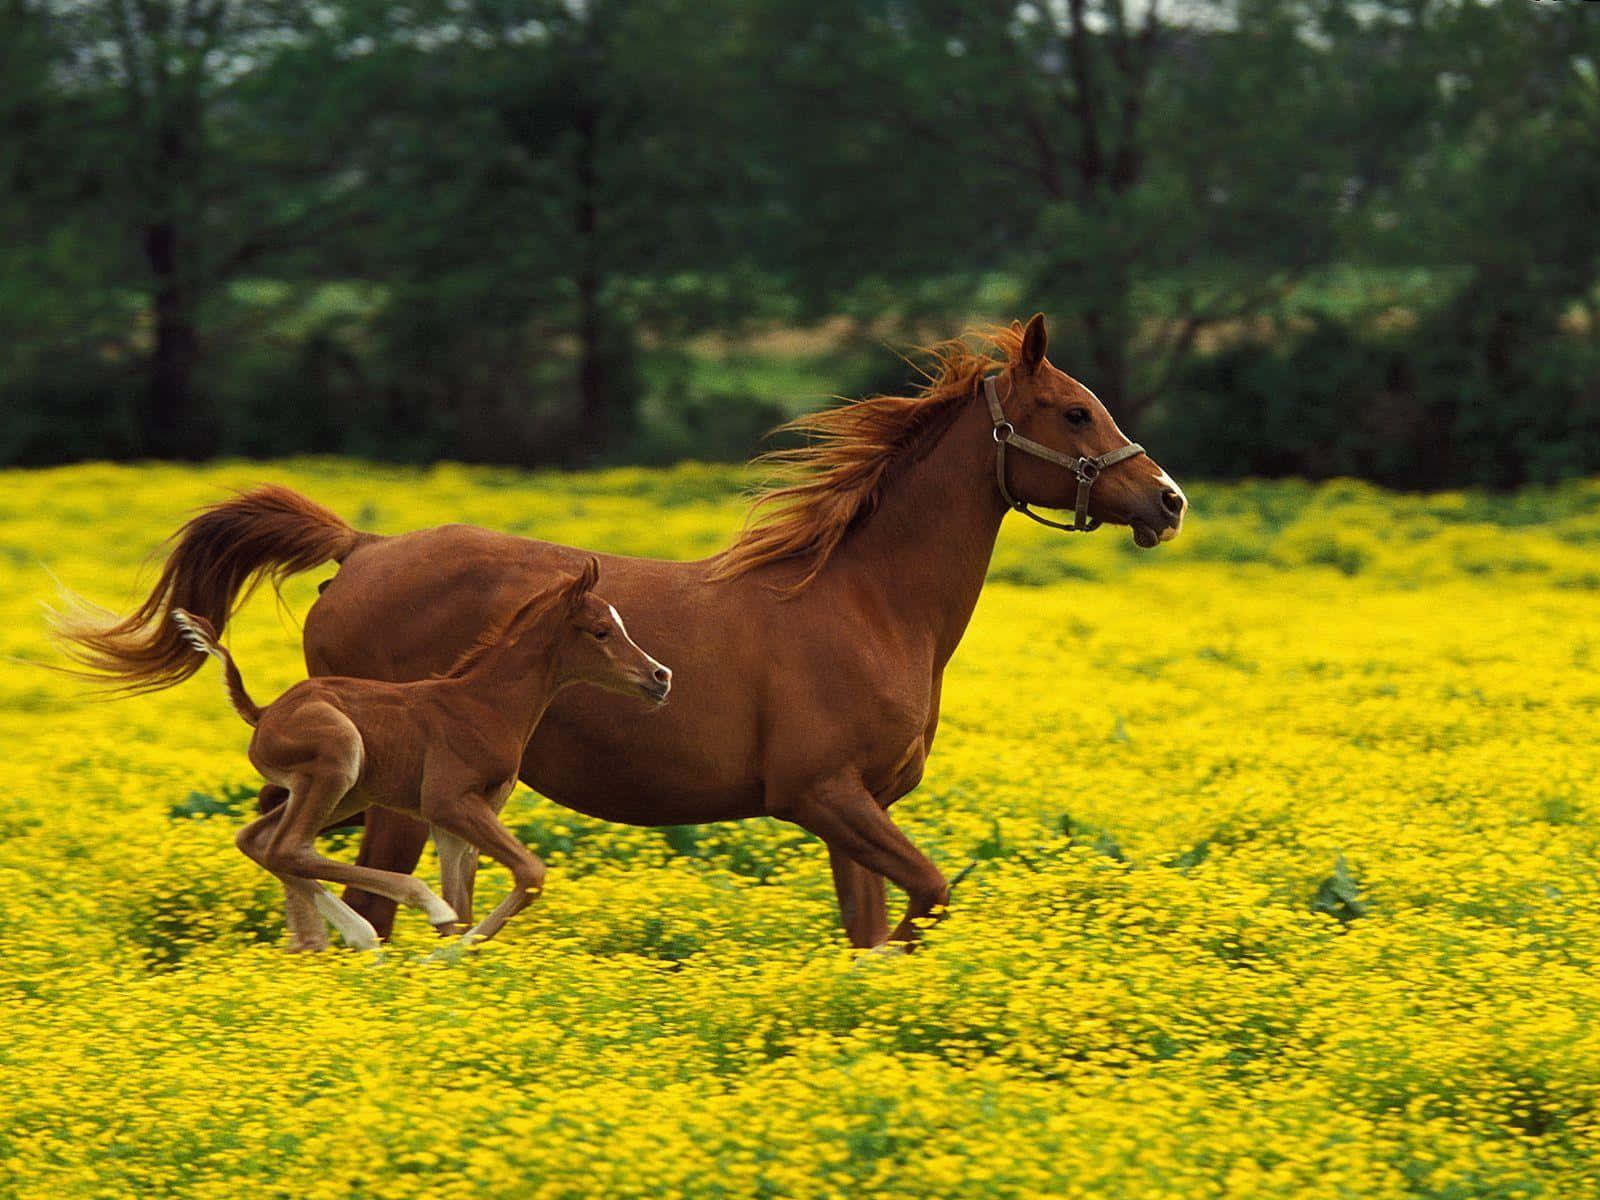 Majestic Brown Horse galloping in nature Wallpaper